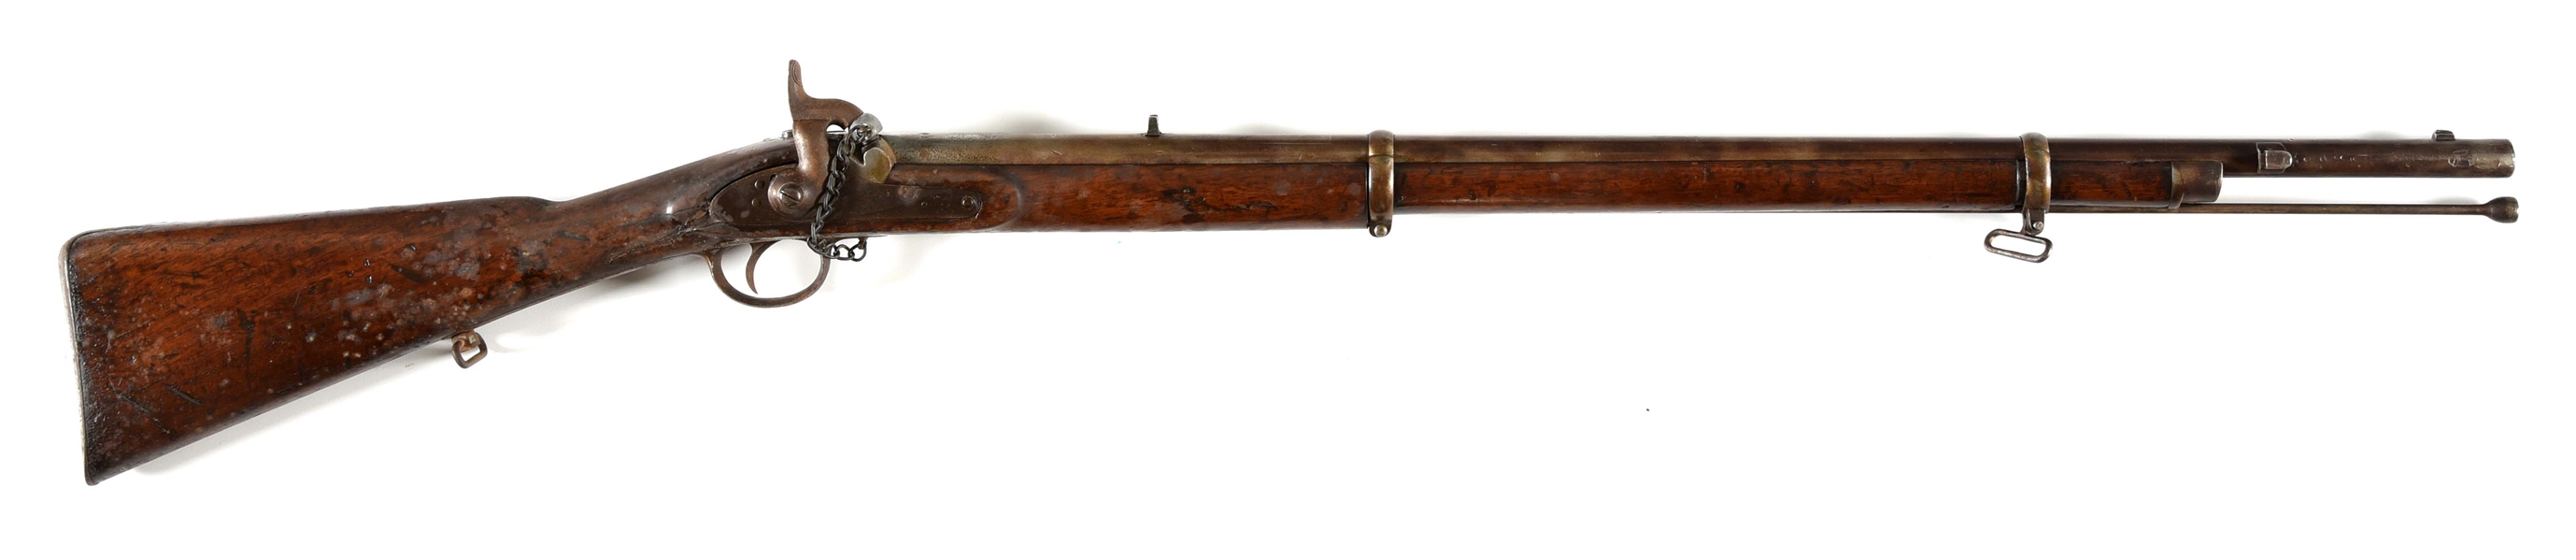 (A) ENFIELD PATTERN PERCUSSION MUSKET.